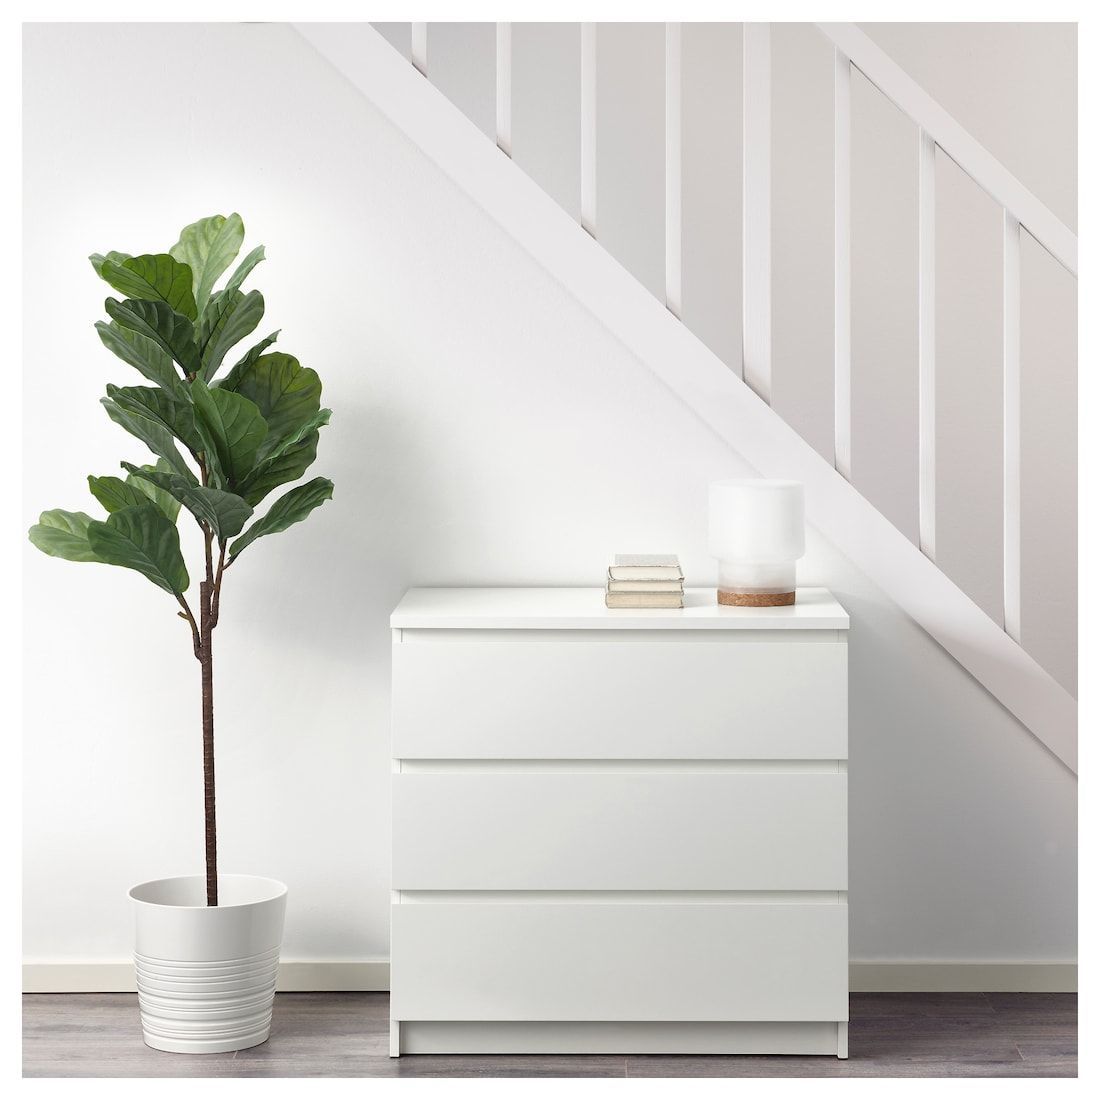 IKEA FEJKA Indoor/outdoor Fiddle-Leaf FIG Artificial potted plant -   18 artificial plants In Bedroom ideas